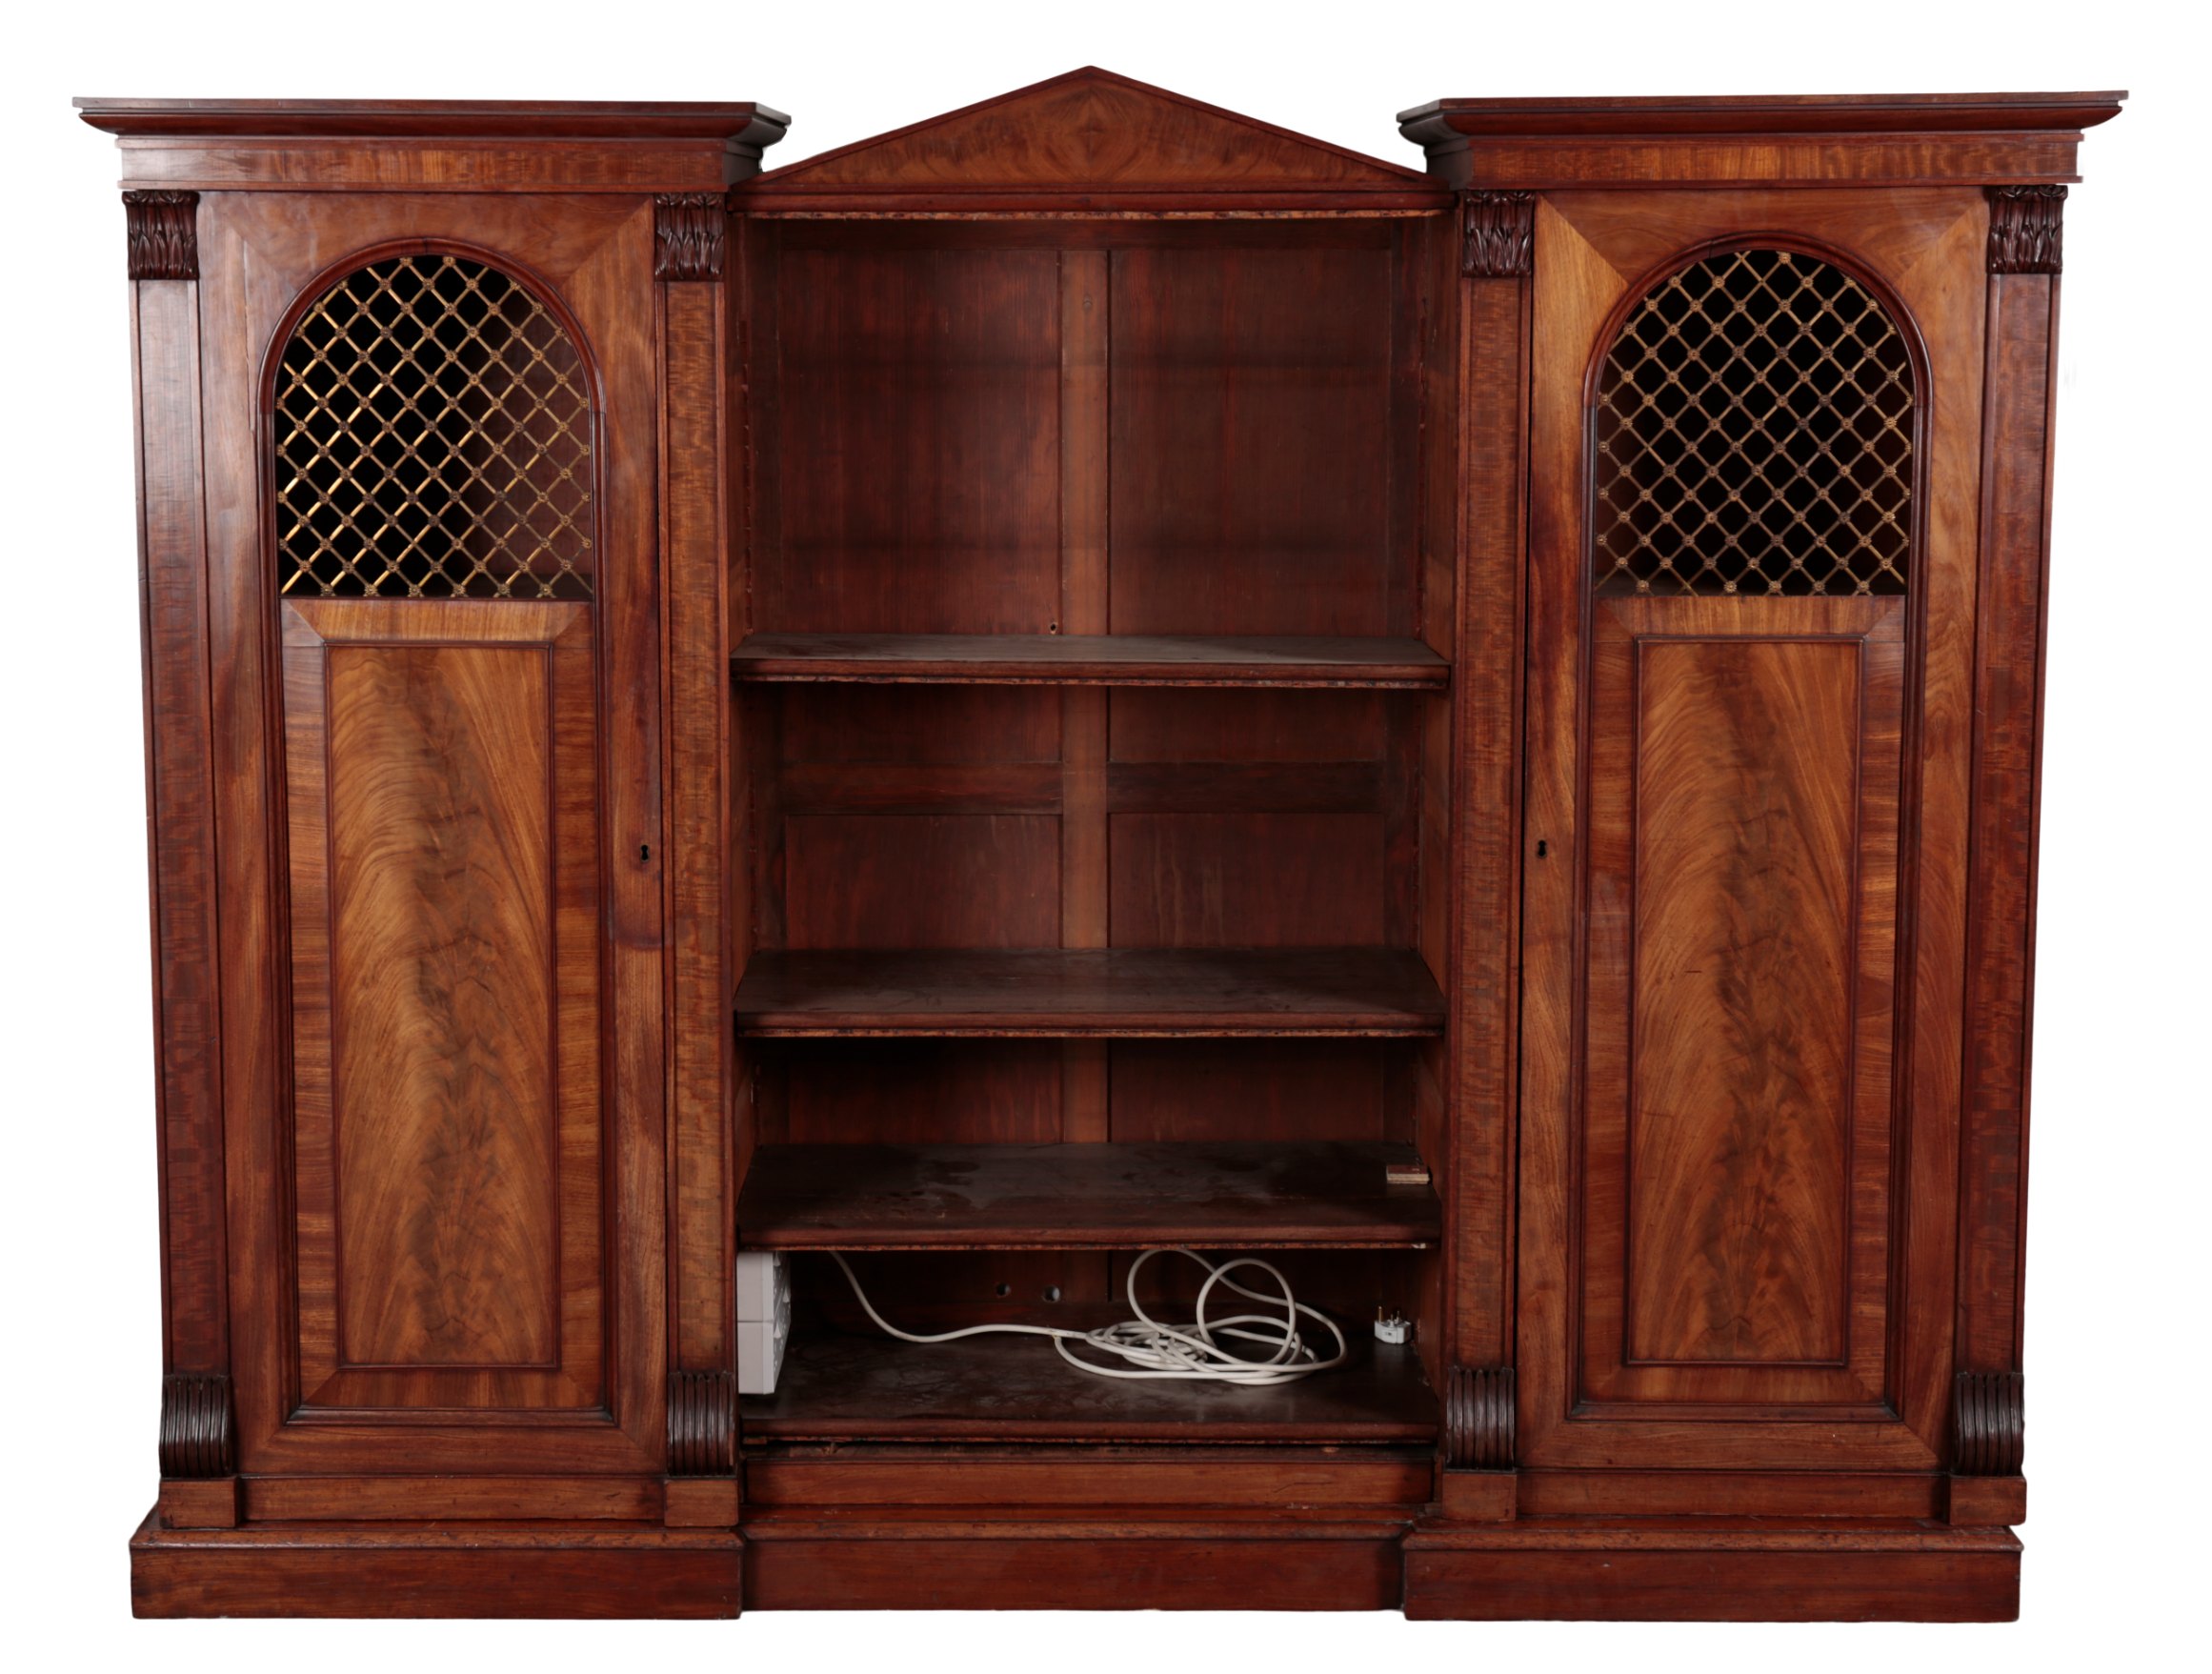 A WILLIAM IV MAHOGANY INVERTED BREAKFRONT BOOKCASE